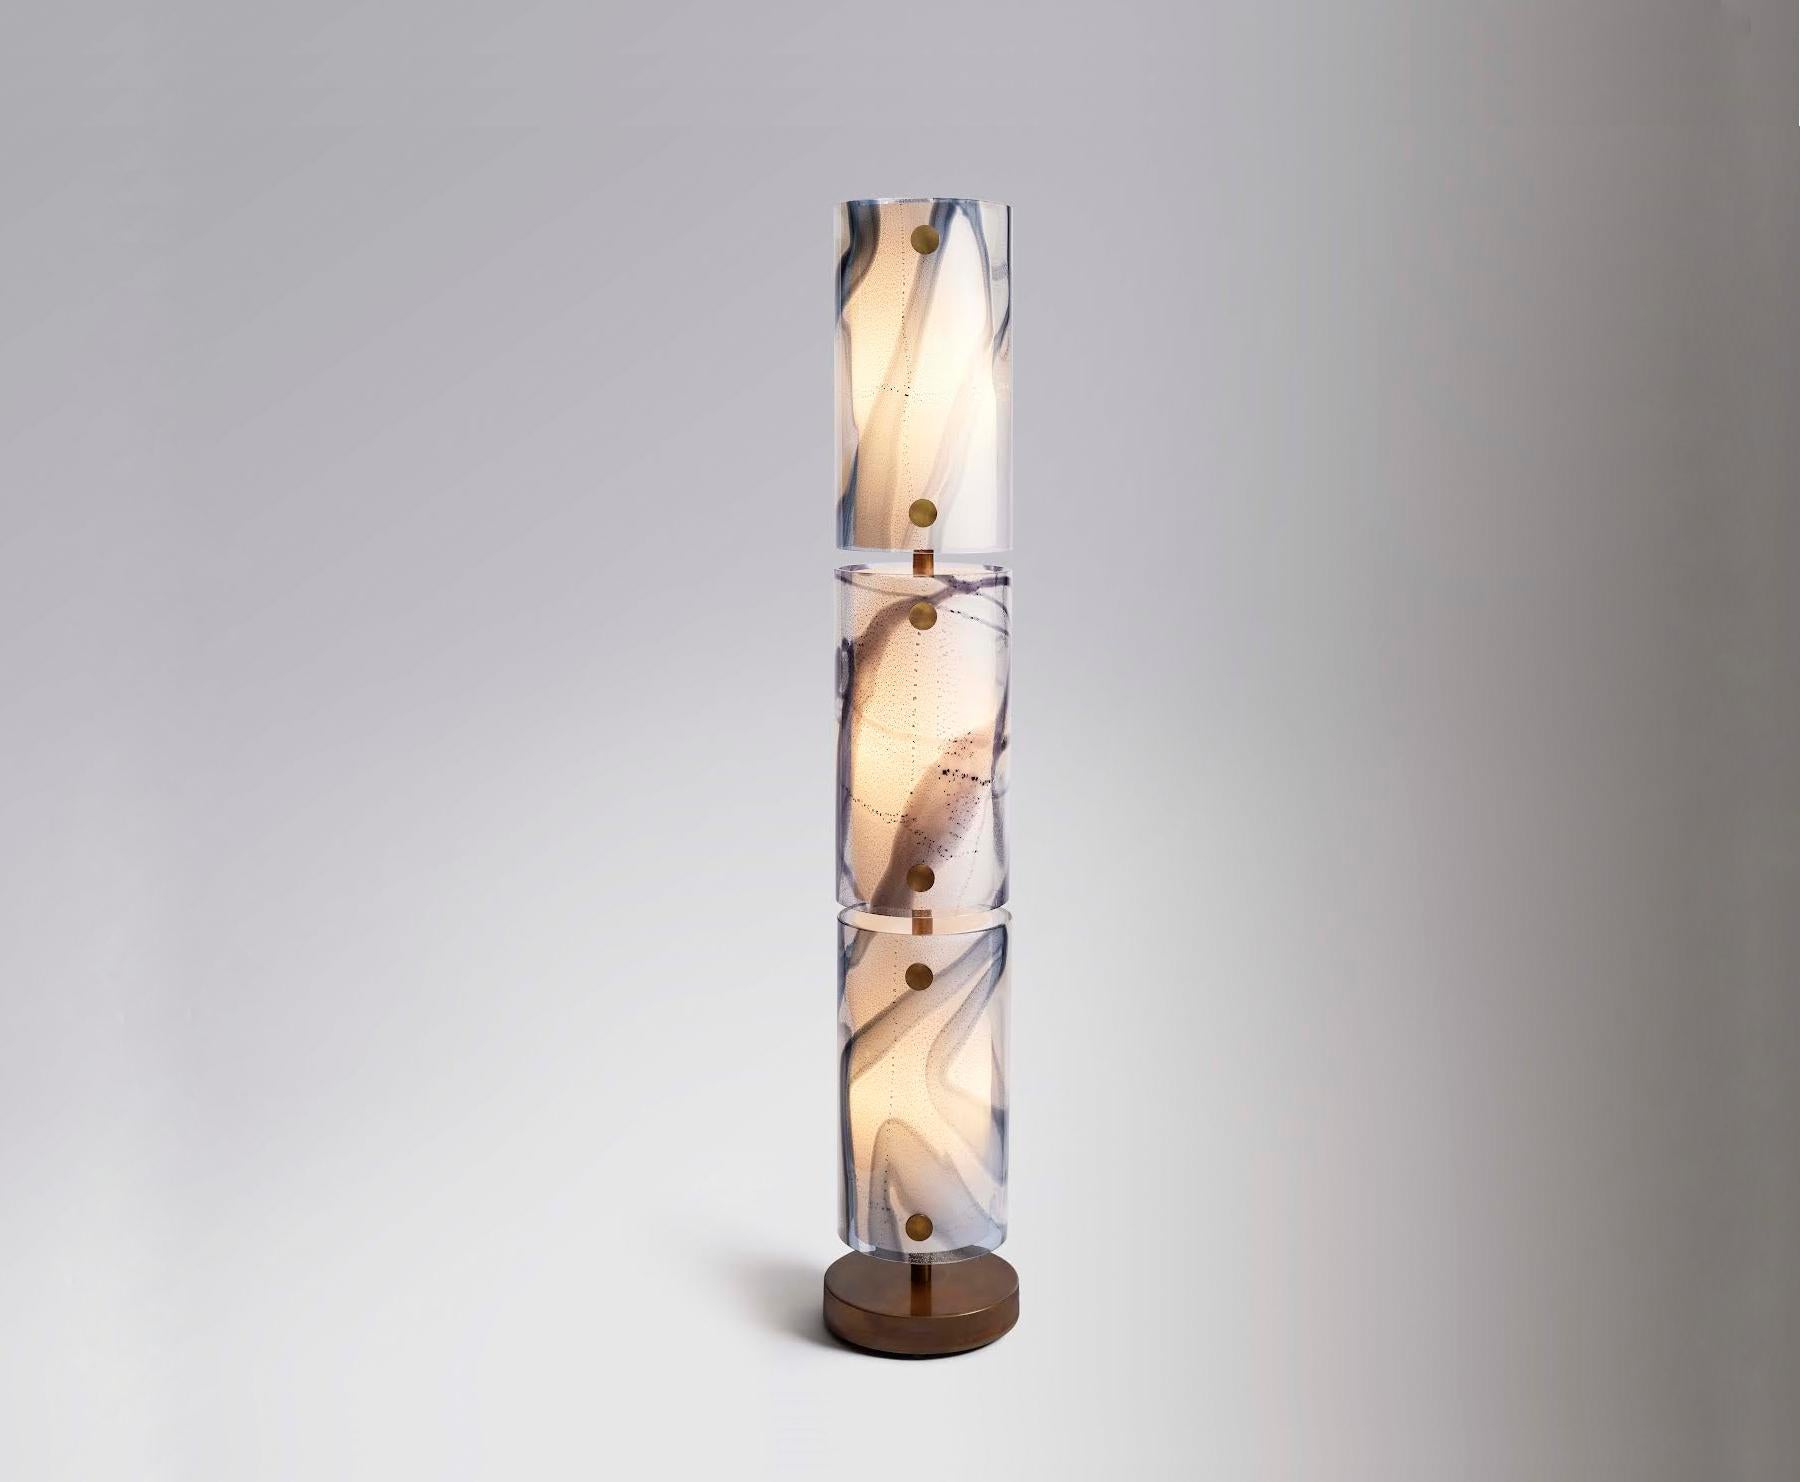 Fabricated in Murano, Italy by storied glassblower Seguso, Nur is a beacon of light, comprised of three cylinders of Venetian bigolo glass with silver leaf and a plexiglass liner, hung on a bronze base.

Electrical: Six G9 bulbs, incandescent 60 w